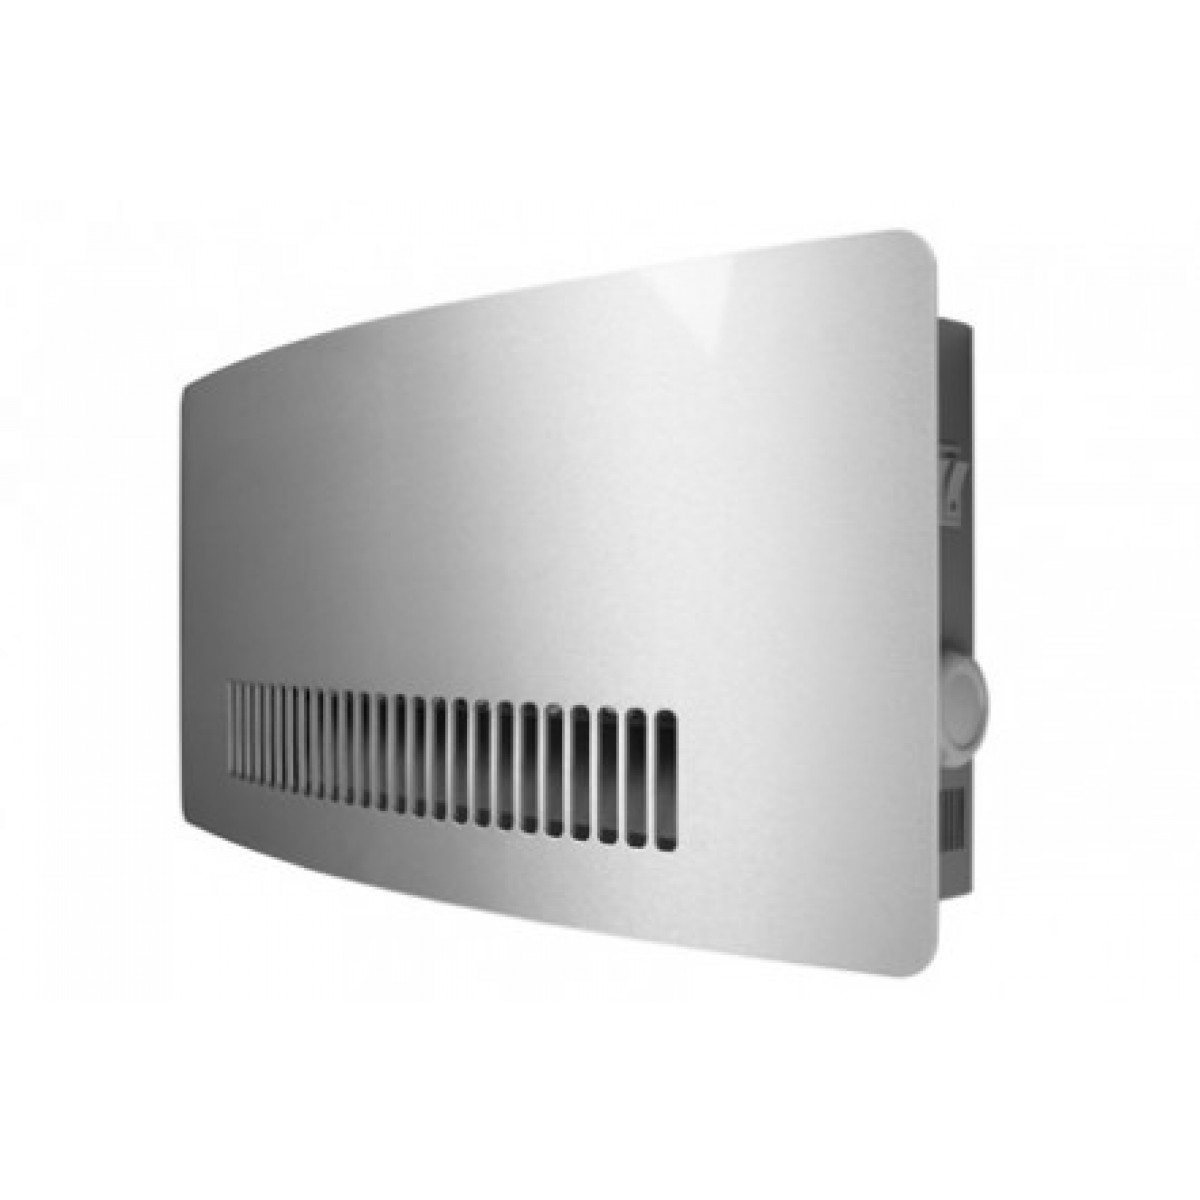 Consort Claudgen Chelsea Wmh3rx 3kw Wireless Controlled Wall Mounted Fan Heater with regard to size 1200 X 1200